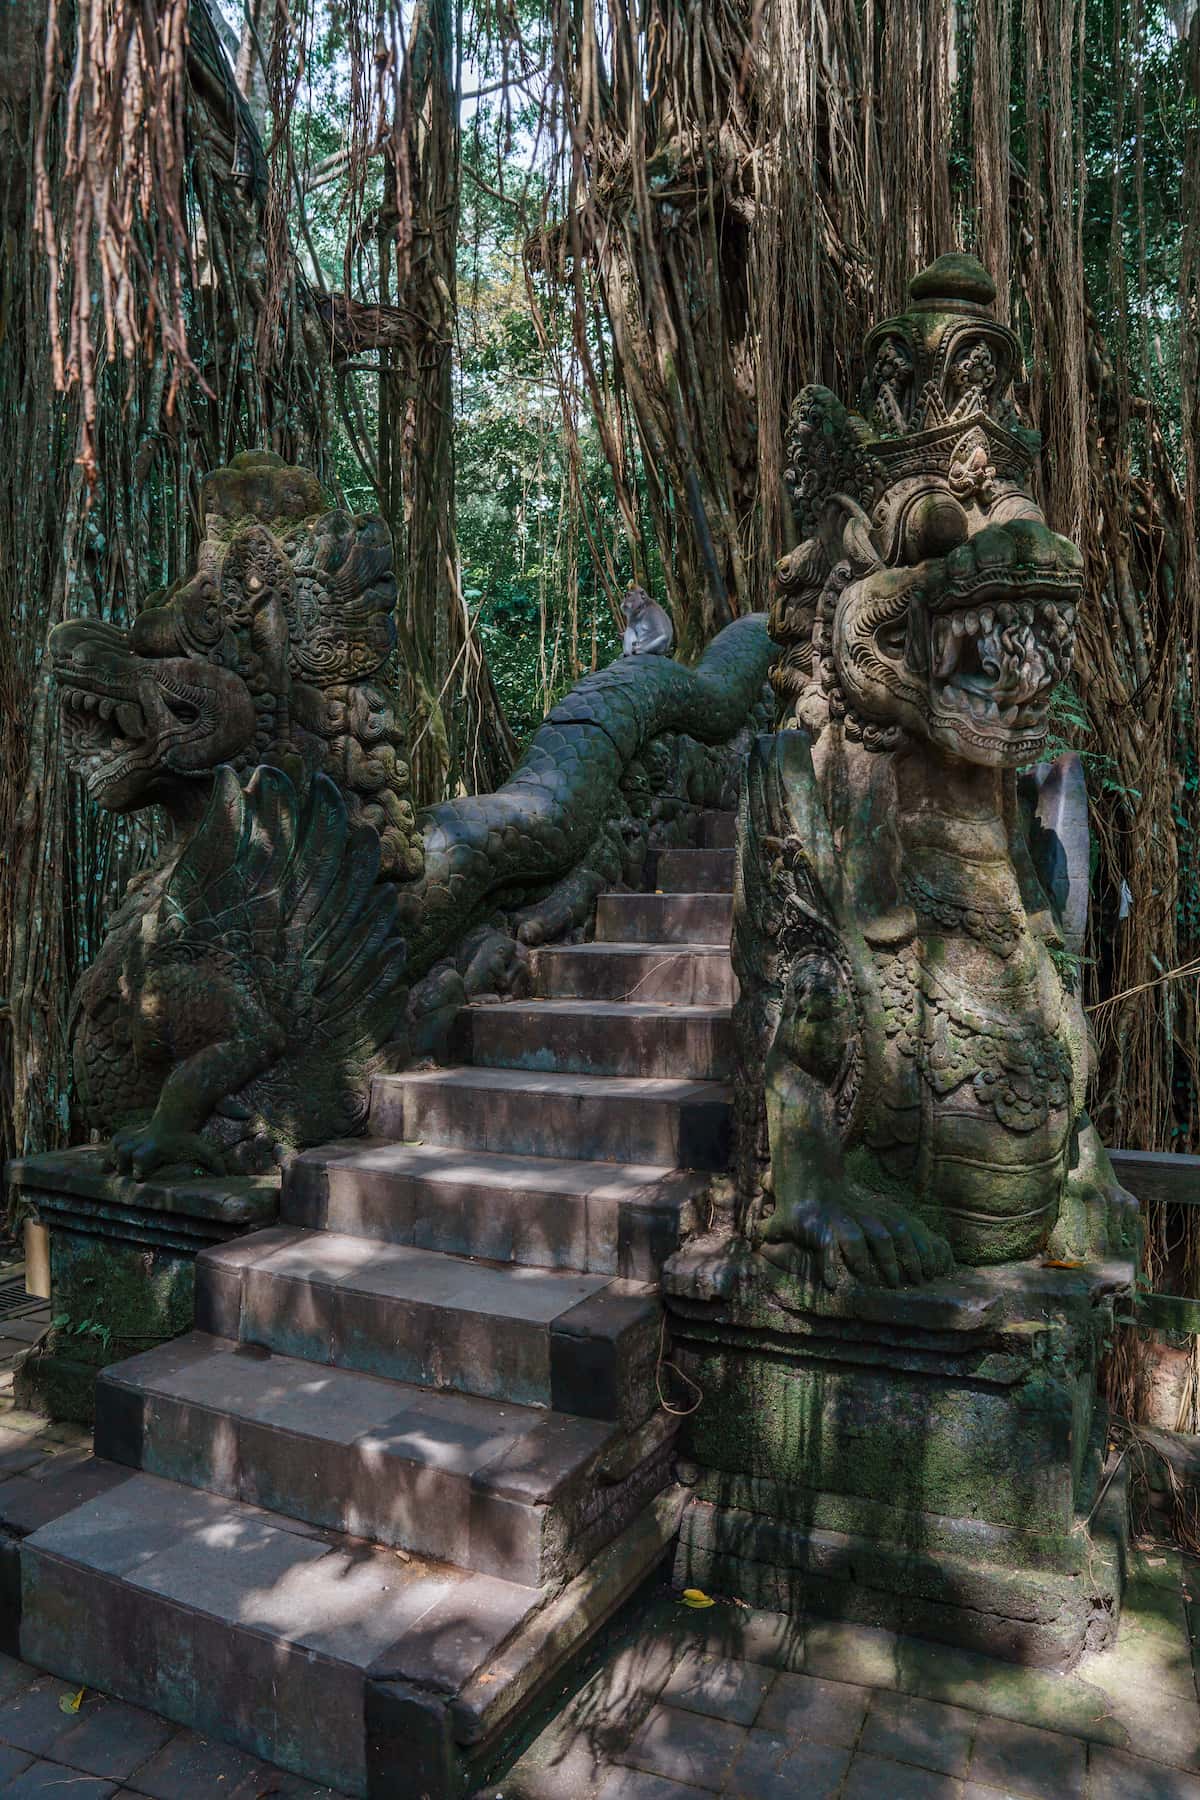 Ubud Monkey Forest is a must visit on your 5 day itinerary Bali.